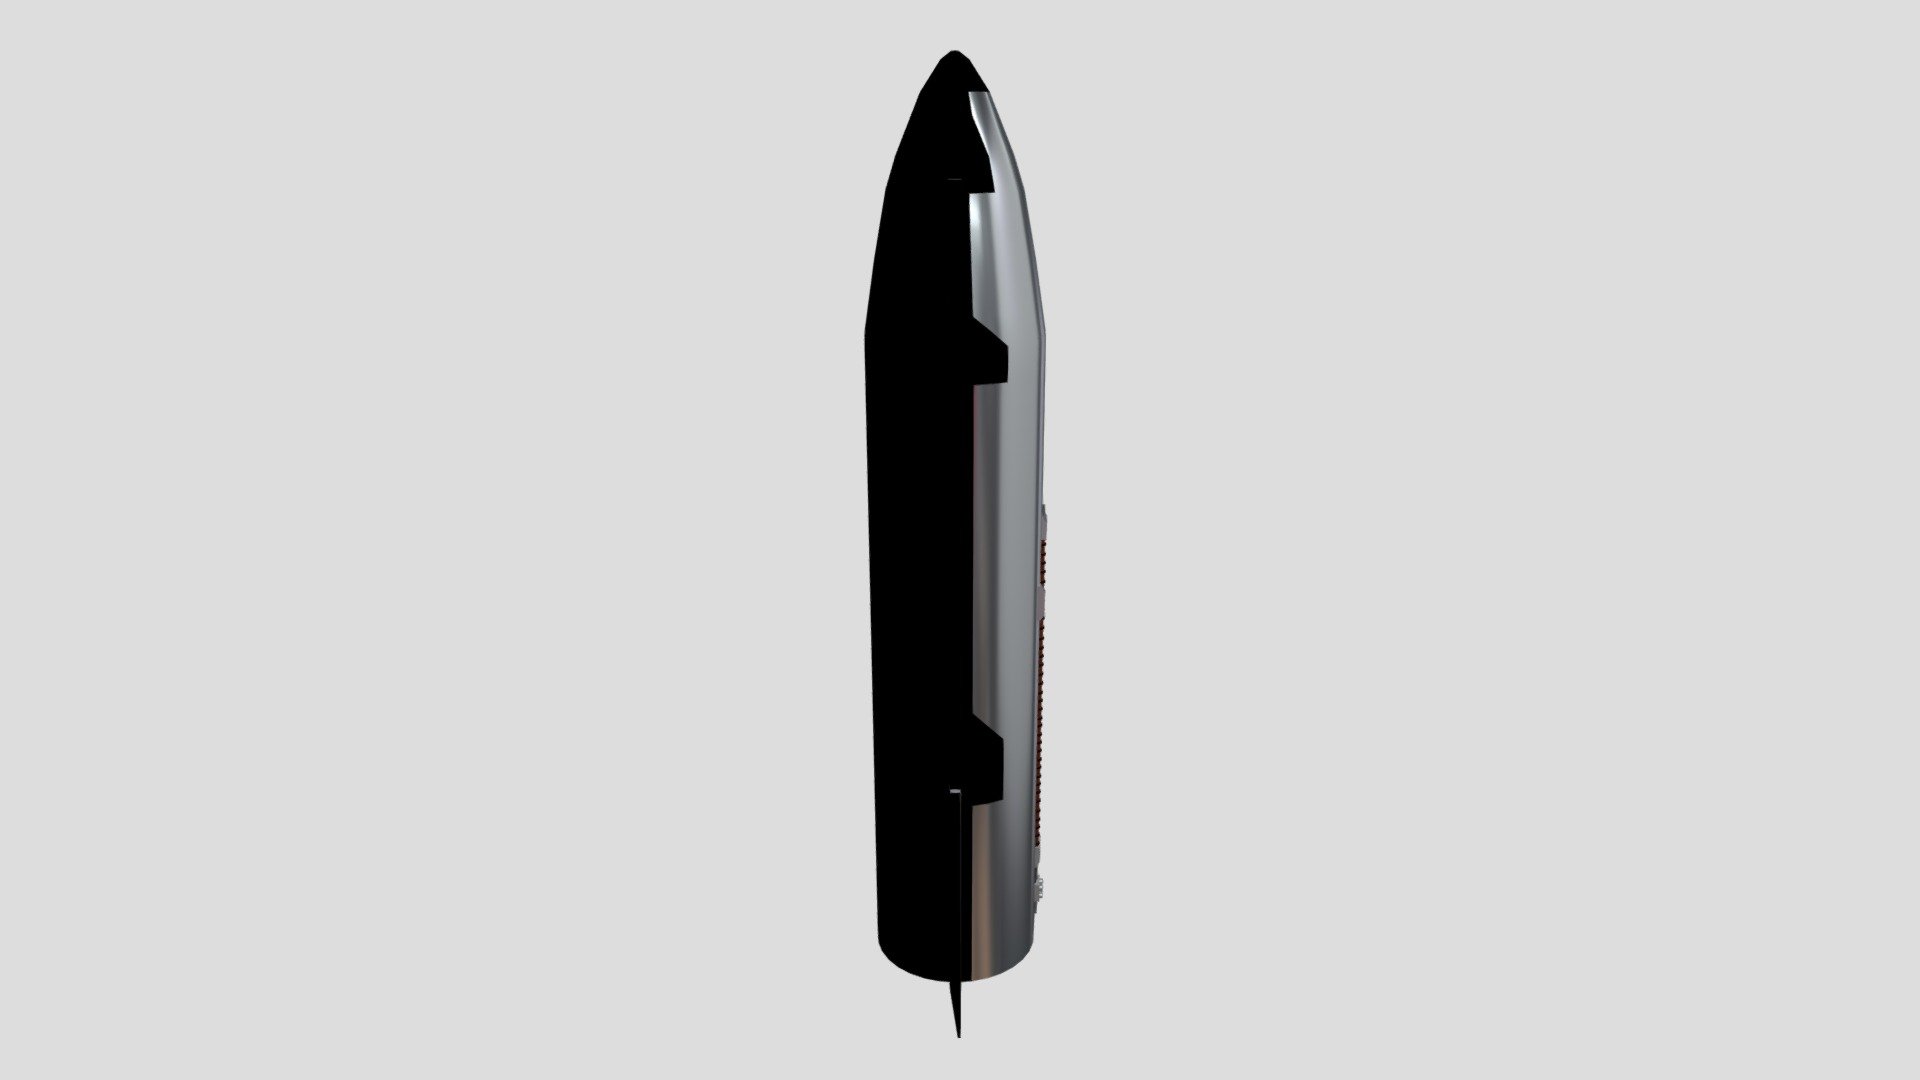 Ripped out of a combined SN20 + Booster USD file - SpaceX Starship SN20 - 3D model by Reid (@clith) 3d model